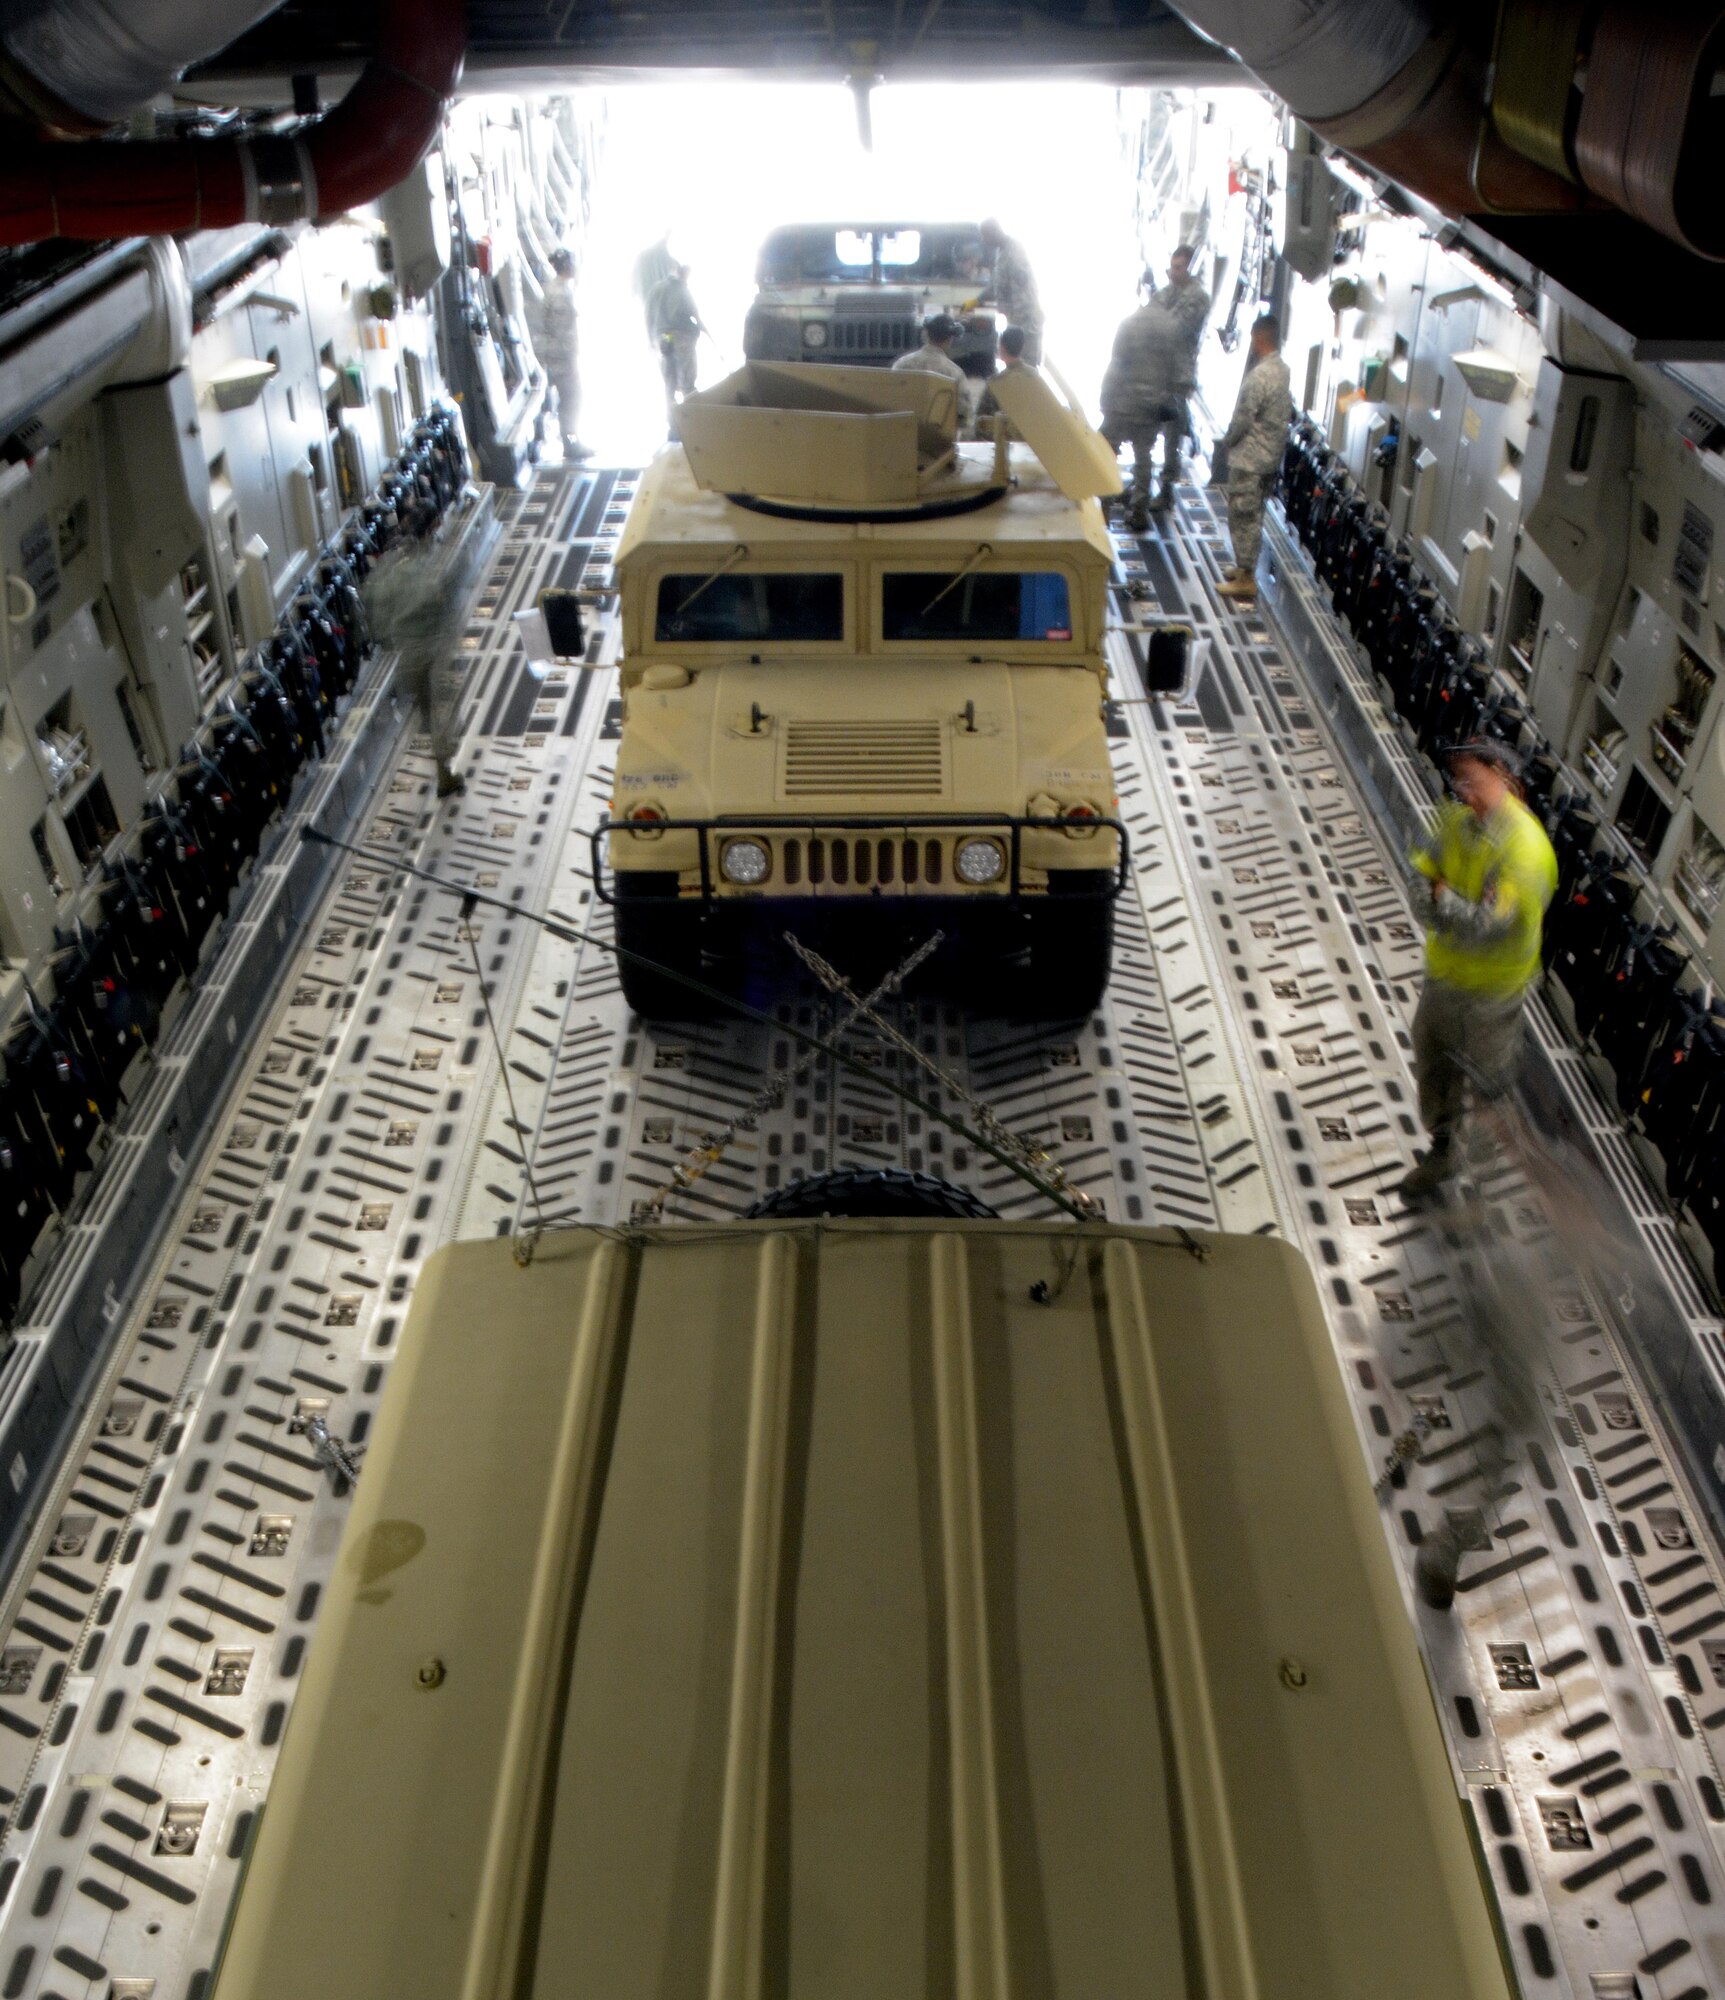 Citizen Airmen from the 349th Air Mobility Wing ensure Humvees are properly secured in a C-17 Globemaster III prior to its take off from Travis Air Force Base, Calif., for Patriot Wyvern on Feb. 11, 2017. Patriot Wyvern is a hands-on, bi-annual event conducted by the 349th Air Mobility Wing designed to hone combat skills and improve organizational interoperability. (U.S. Air Force photo/Staff Sgt. Daniel Phelps)